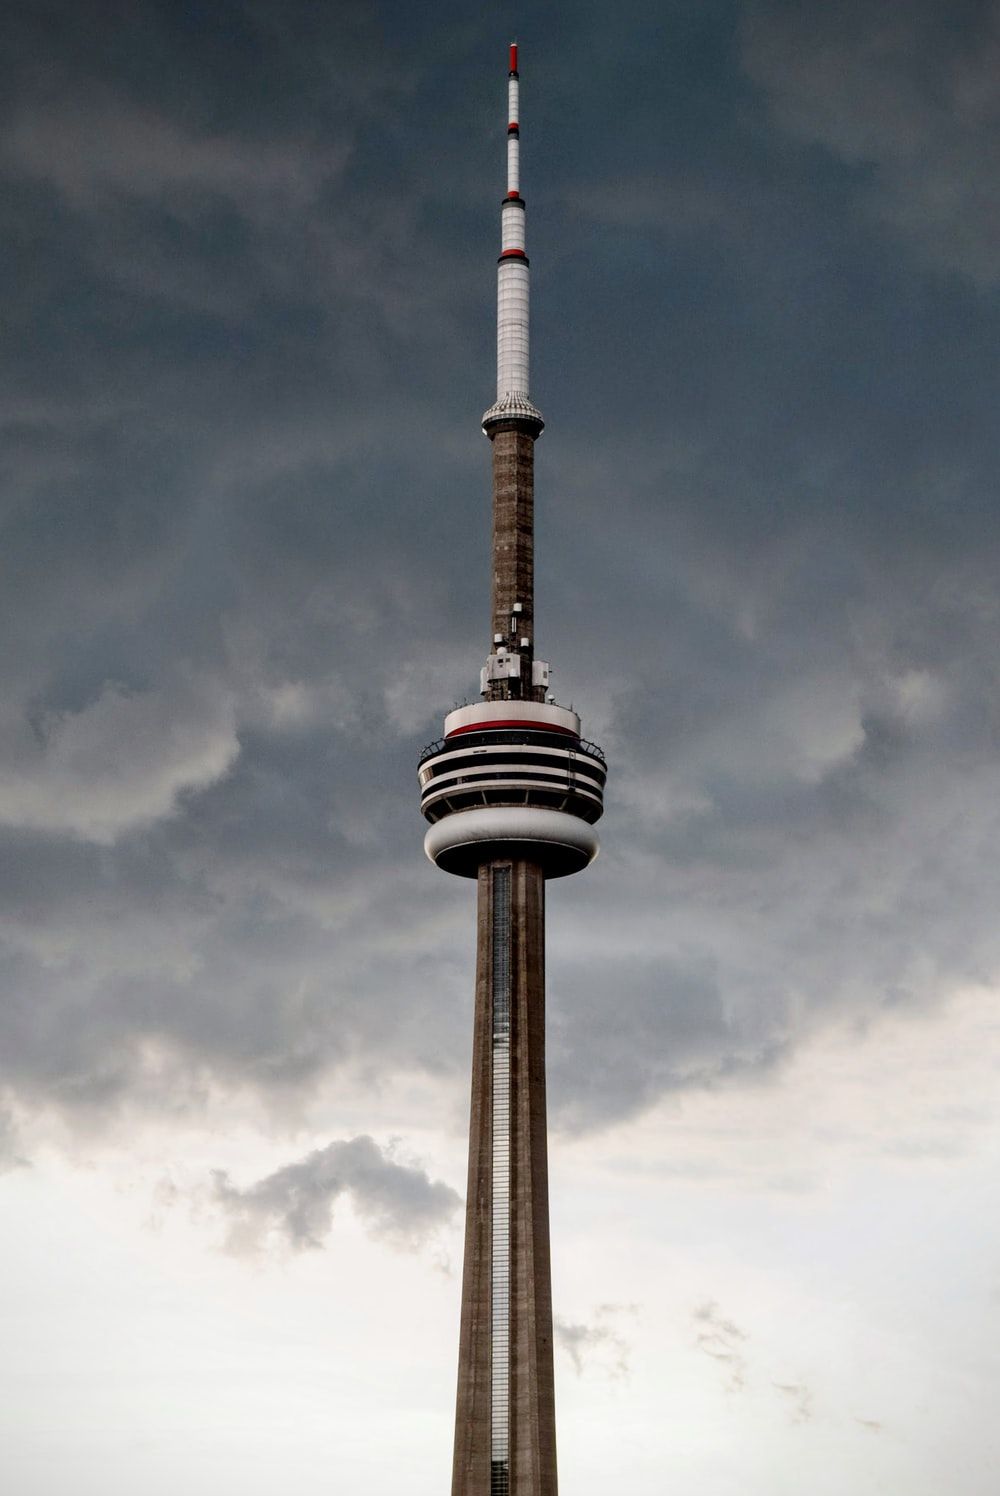 Beautiful Cn Tower Picture. Download Free Image